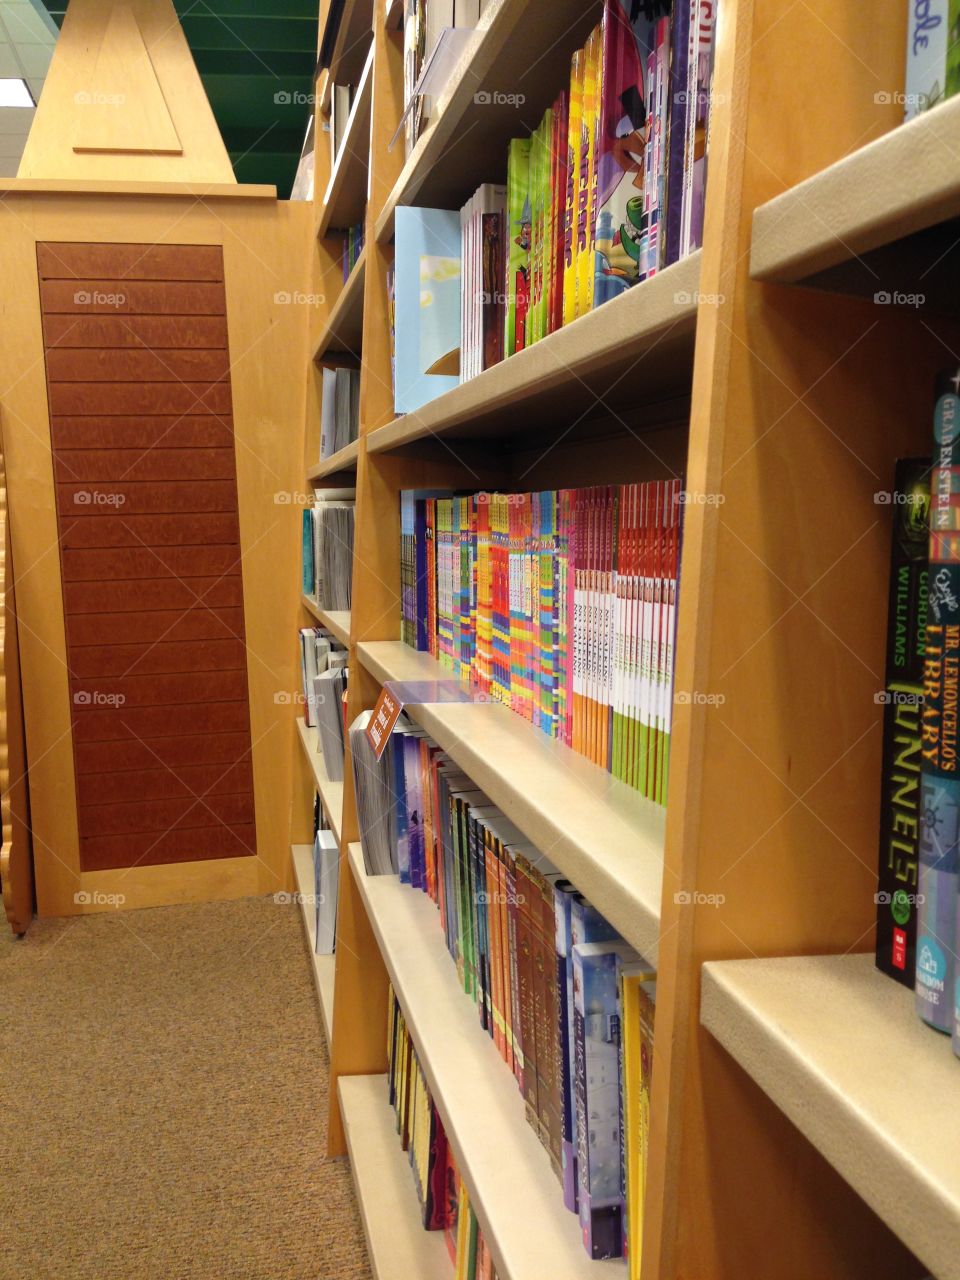 Bookstore shelves. The shelves with books in the children's section of a local bookstore.